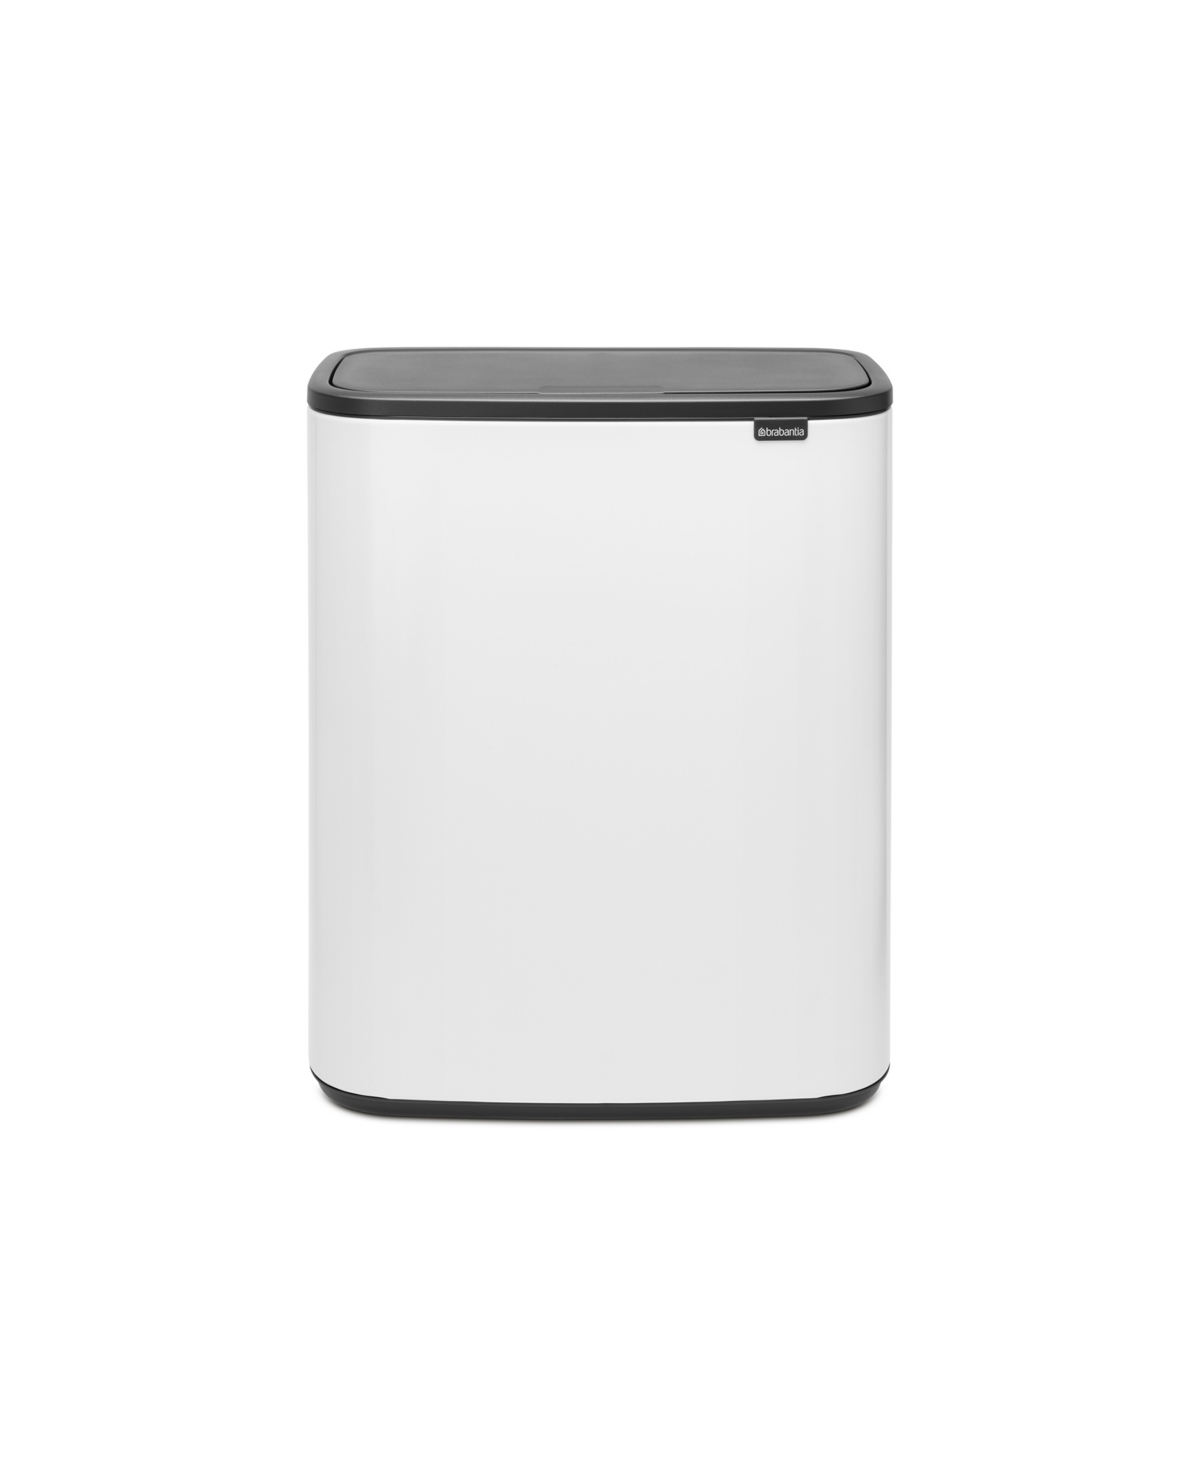 Bo Touch Top Trash Can, 16 Gallon, 60 Liter - Platinum